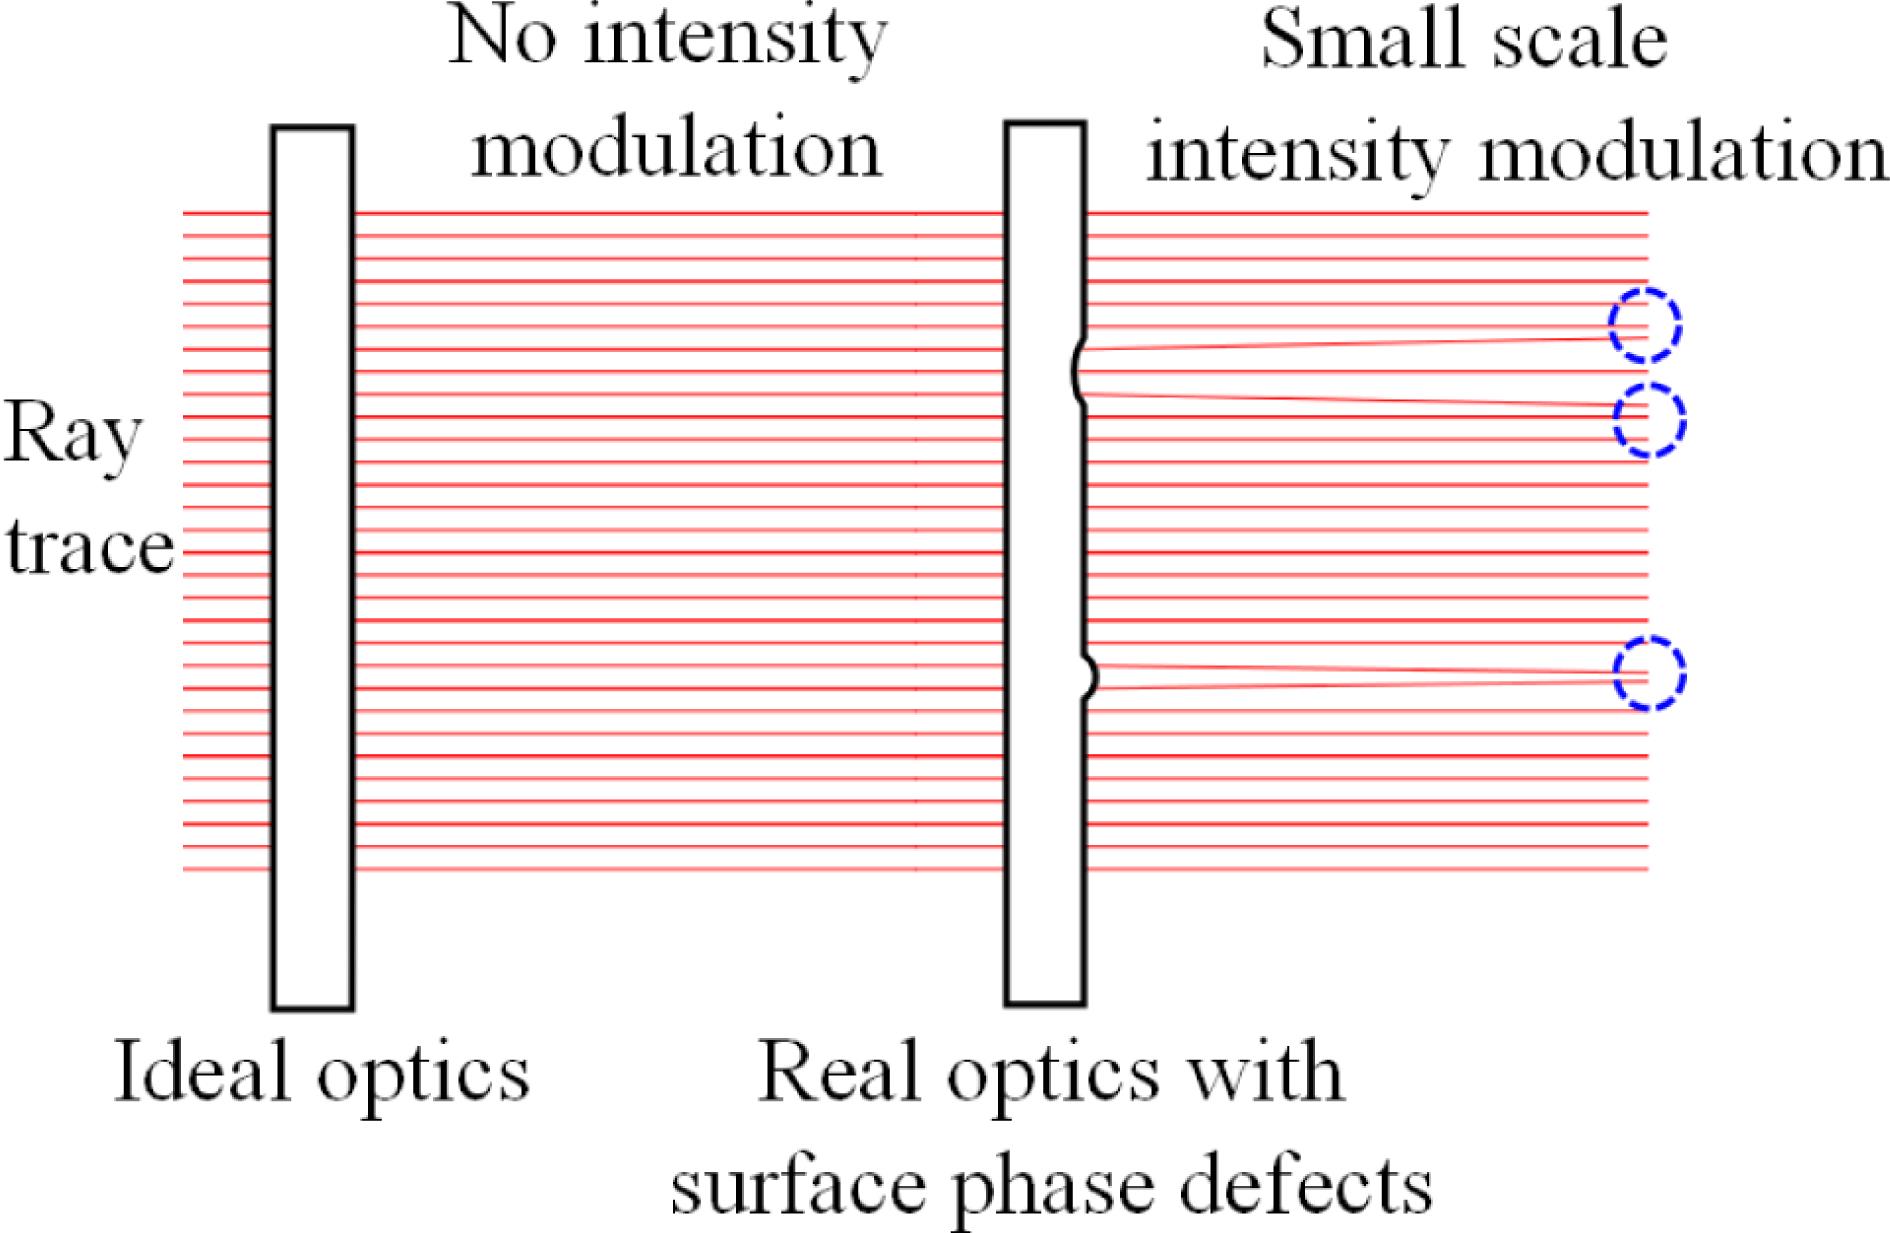 Surface phase defects induced small-scale intensity modulation.